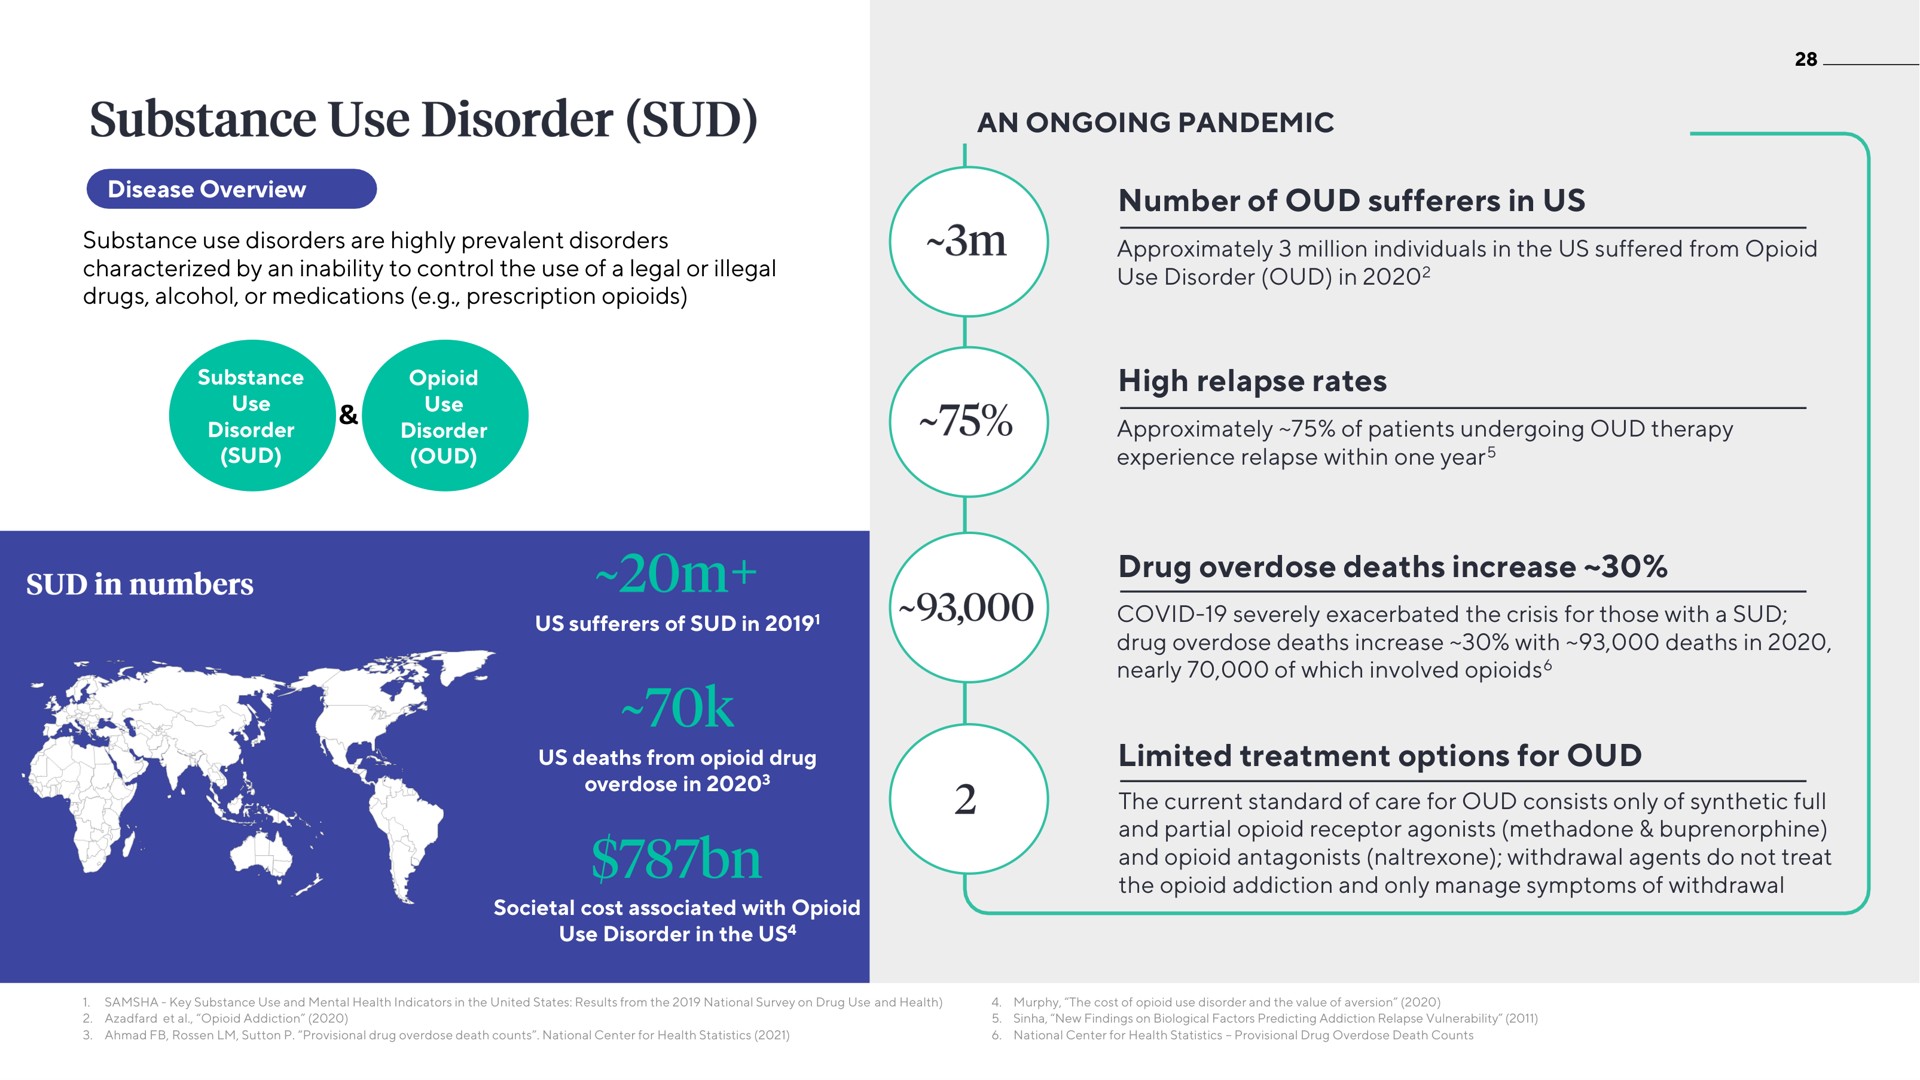 an ongoing pandemic number of sufferers in us high relapse rates drug overdose deaths increase limited treatment options for substance use disorder sud | ATAI